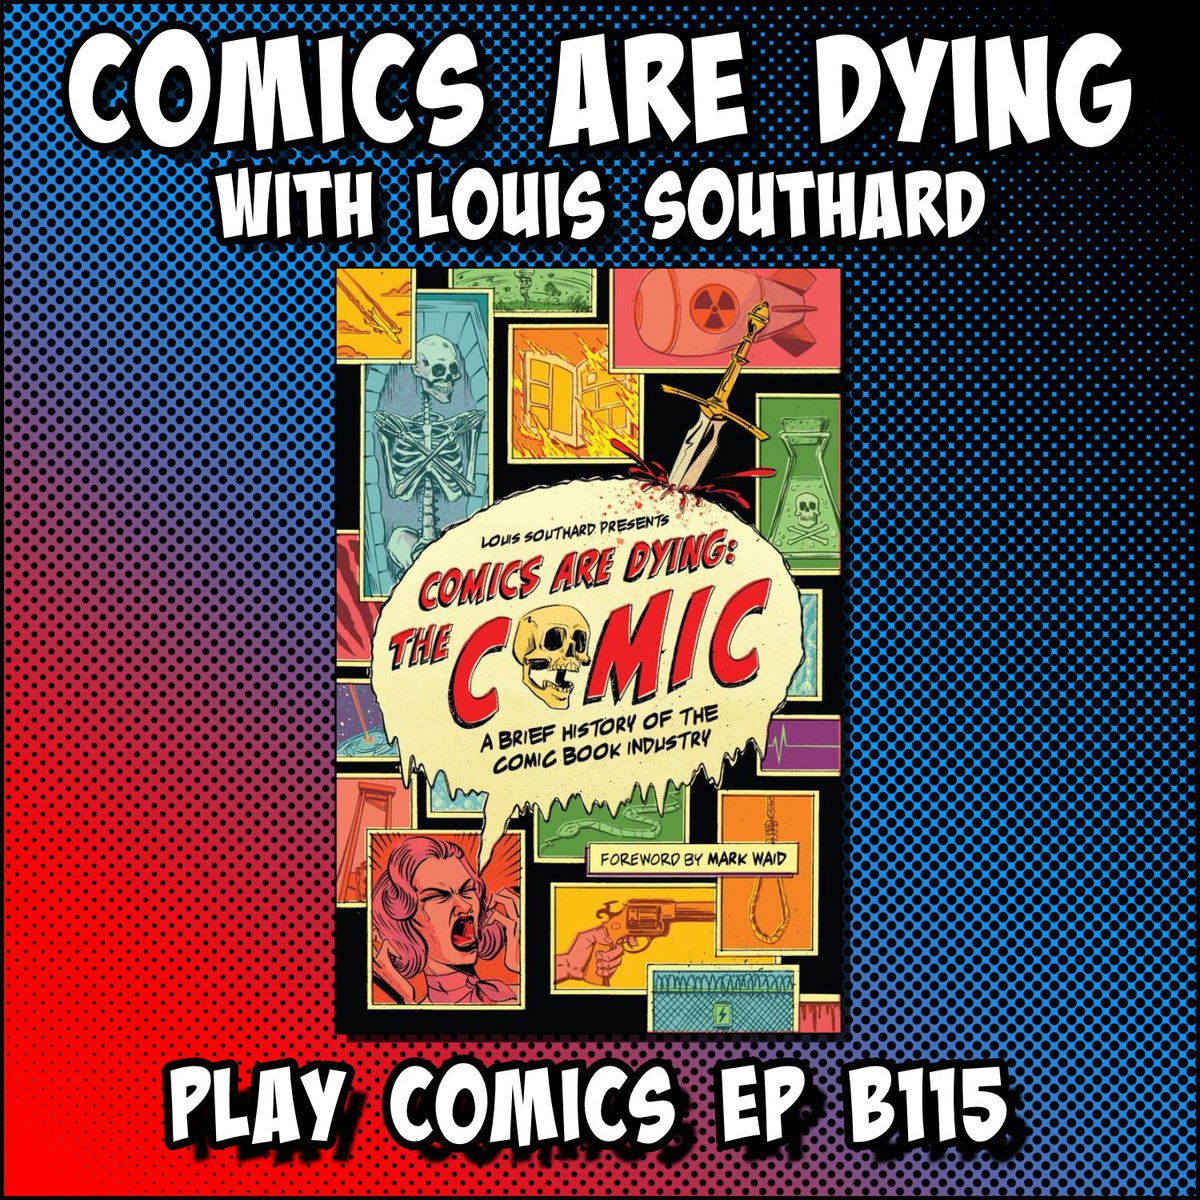 HISTORY LESSON TIME! Listen in as we talk to @louisjsouthard about the comics history anthology Comics Are Dying #podcasts #crowdfunding #comics 🔗 ⬇️